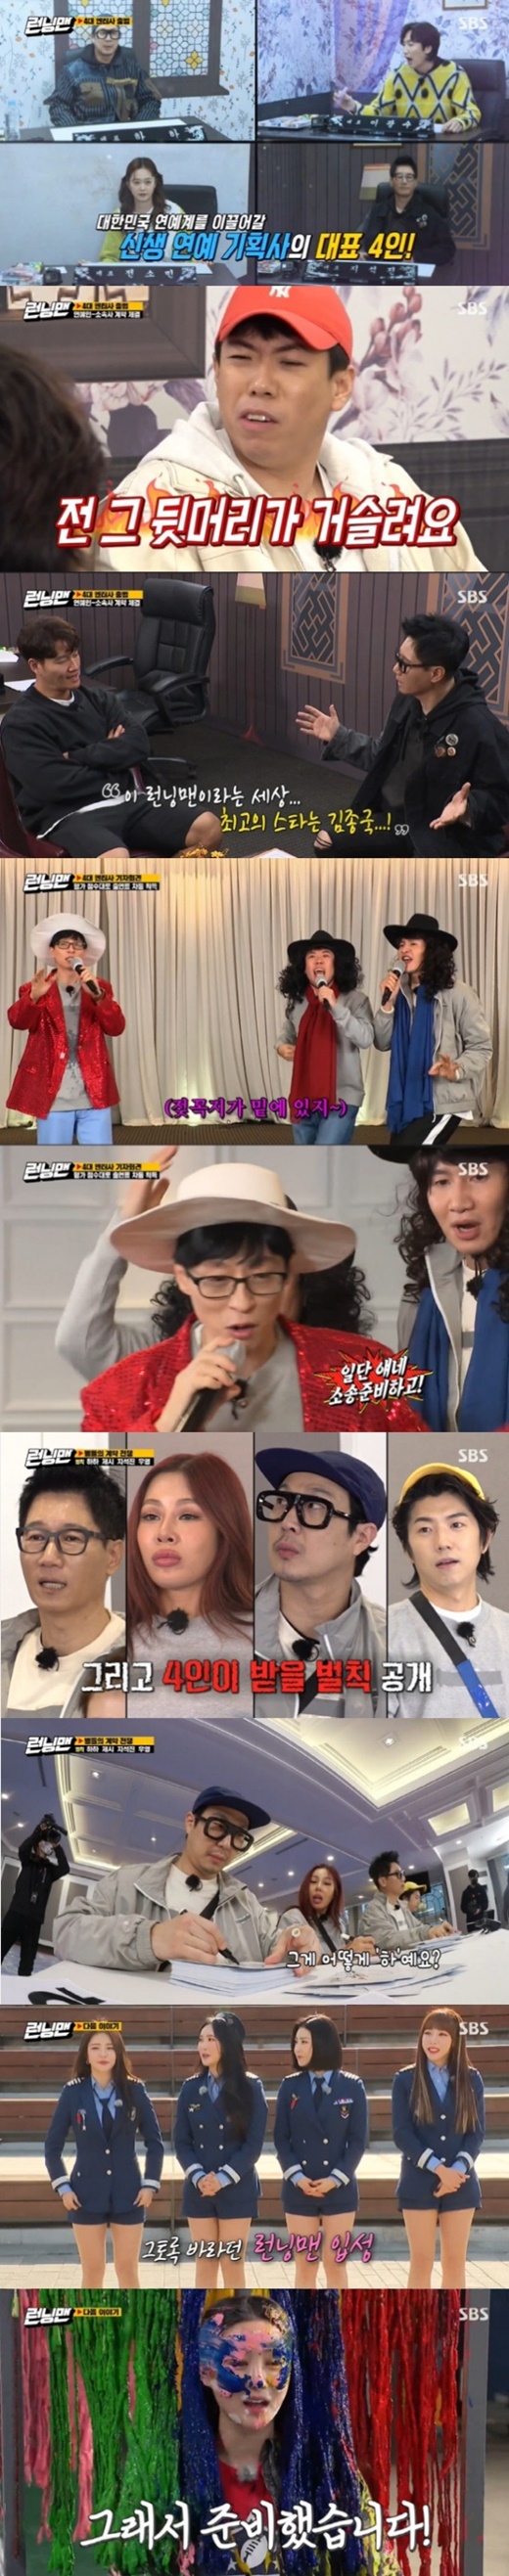 SBS Running Man is showing a steep rise in ratings.Running Man, which aired on the 28th, recorded 3.7% of the 2049 target audience rating (hereinafter based on Nielsen Korea metropolitan area and households), and it has maintained its No. 1 position in the same time zone for three consecutive weeks.The highest audience rating per minute jumped to 8 percent.On this day, Race was decorated with The Contract War of the Stars Race, and Jessie X Wooyoung was a guest, while Haha, Lee Kwang-soo, Ji Suk-jin and Jeon So-min turned into entertainment representatives.Representatives had to succeed in signing a contract to cooperate with entertainers and distribution of profits, and a sparkling contract war was held from the beginning.In particular, Lee Kwang-soo surprised everyone by actually cutting his back hair at the end of Yang Se-chan, saying, I will sign if I cut the back hair.At the subsequent renewal time, Ji Suk-jins agency was closed down with no contractor, and Ji Suk-jin signed a contract with J Enter (Jeon So-min).The members missed the correct answer by revealing the knowledge base in the next mission, Yaja Golden Bell, and Jessie and Wooyoung were also surprised by the problems of the Russian Presidents full name and the Argentine capital.As a result of the final mission, Running Entertainment Hall, Jeon So-min was ranked first among the three representatives and Song Ji-hyo was ranked first in entertainers.The scene was the highest audience rating of 8% per minute, with Wooyoung, Jessie and Ji Suk-jin being penalized.Four people, including the representative Haha, signed 100 autographs with penalties.On the other hand, the Running Man, which will be broadcast on the 4th of next month, will be launched by the Reverse Icon Brave Girls, and will perform Brave Idol Day Race.